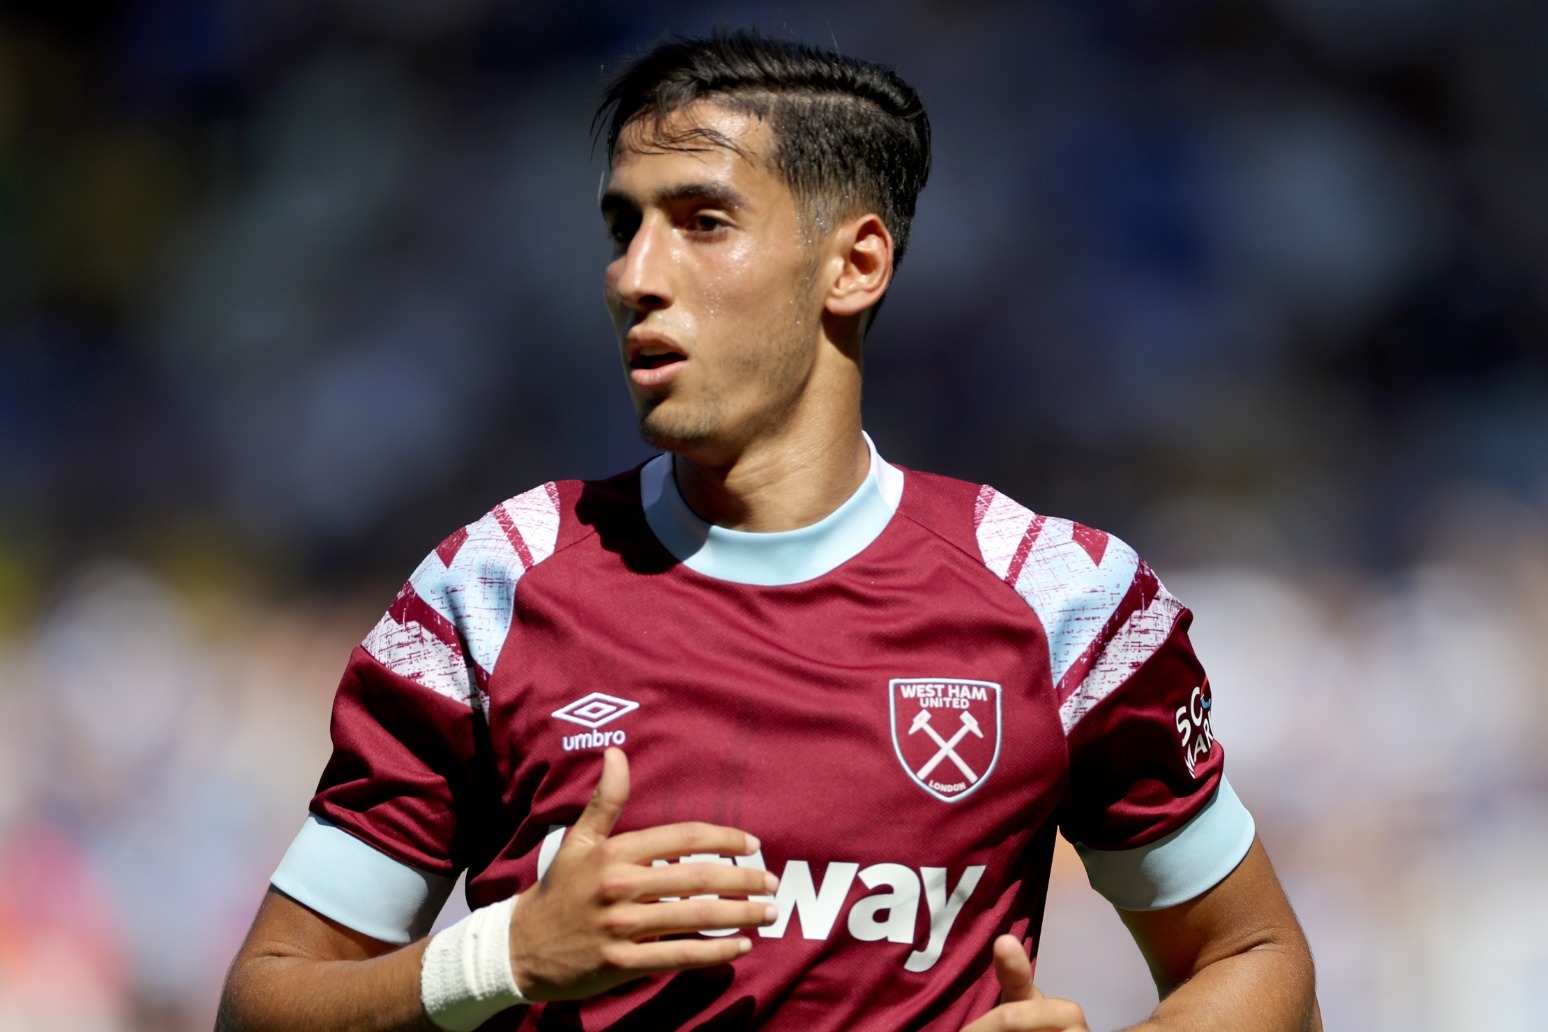 David Moyes hoping to have Nayef Aguerd in West Ham squad for Silkeborg clash 